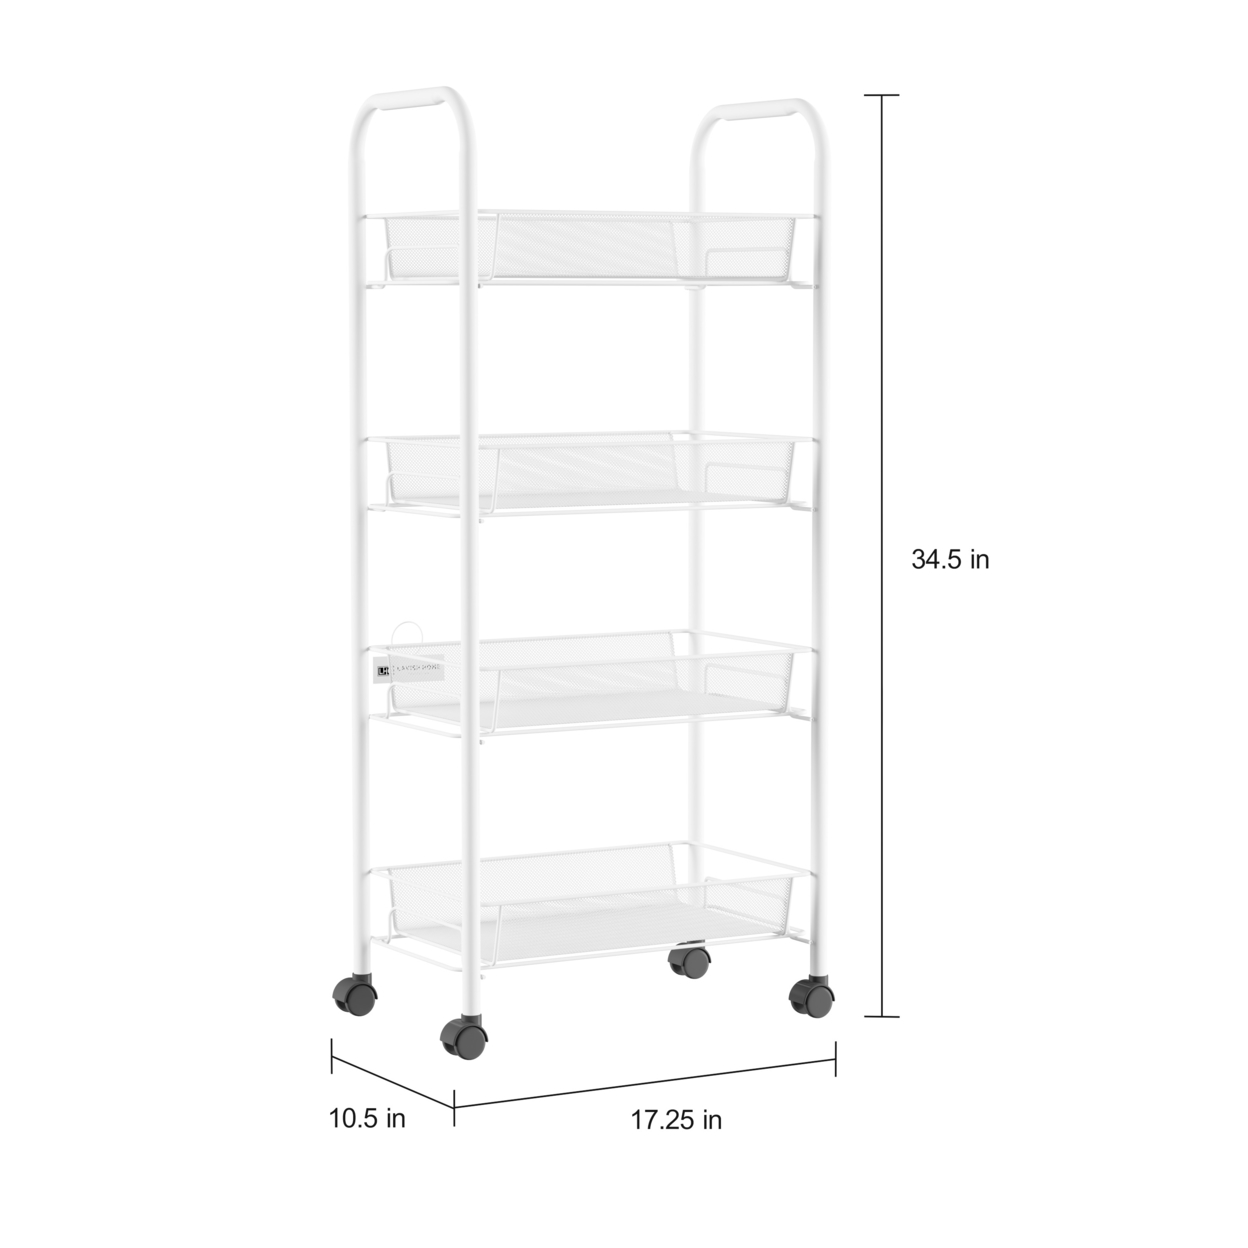 4-Tiered Narrow Rolling Storage Shelves - Mobile Space Saving Utility Organizer Cart For Kitchen, Bathroom, Laundry, Garage Or Office